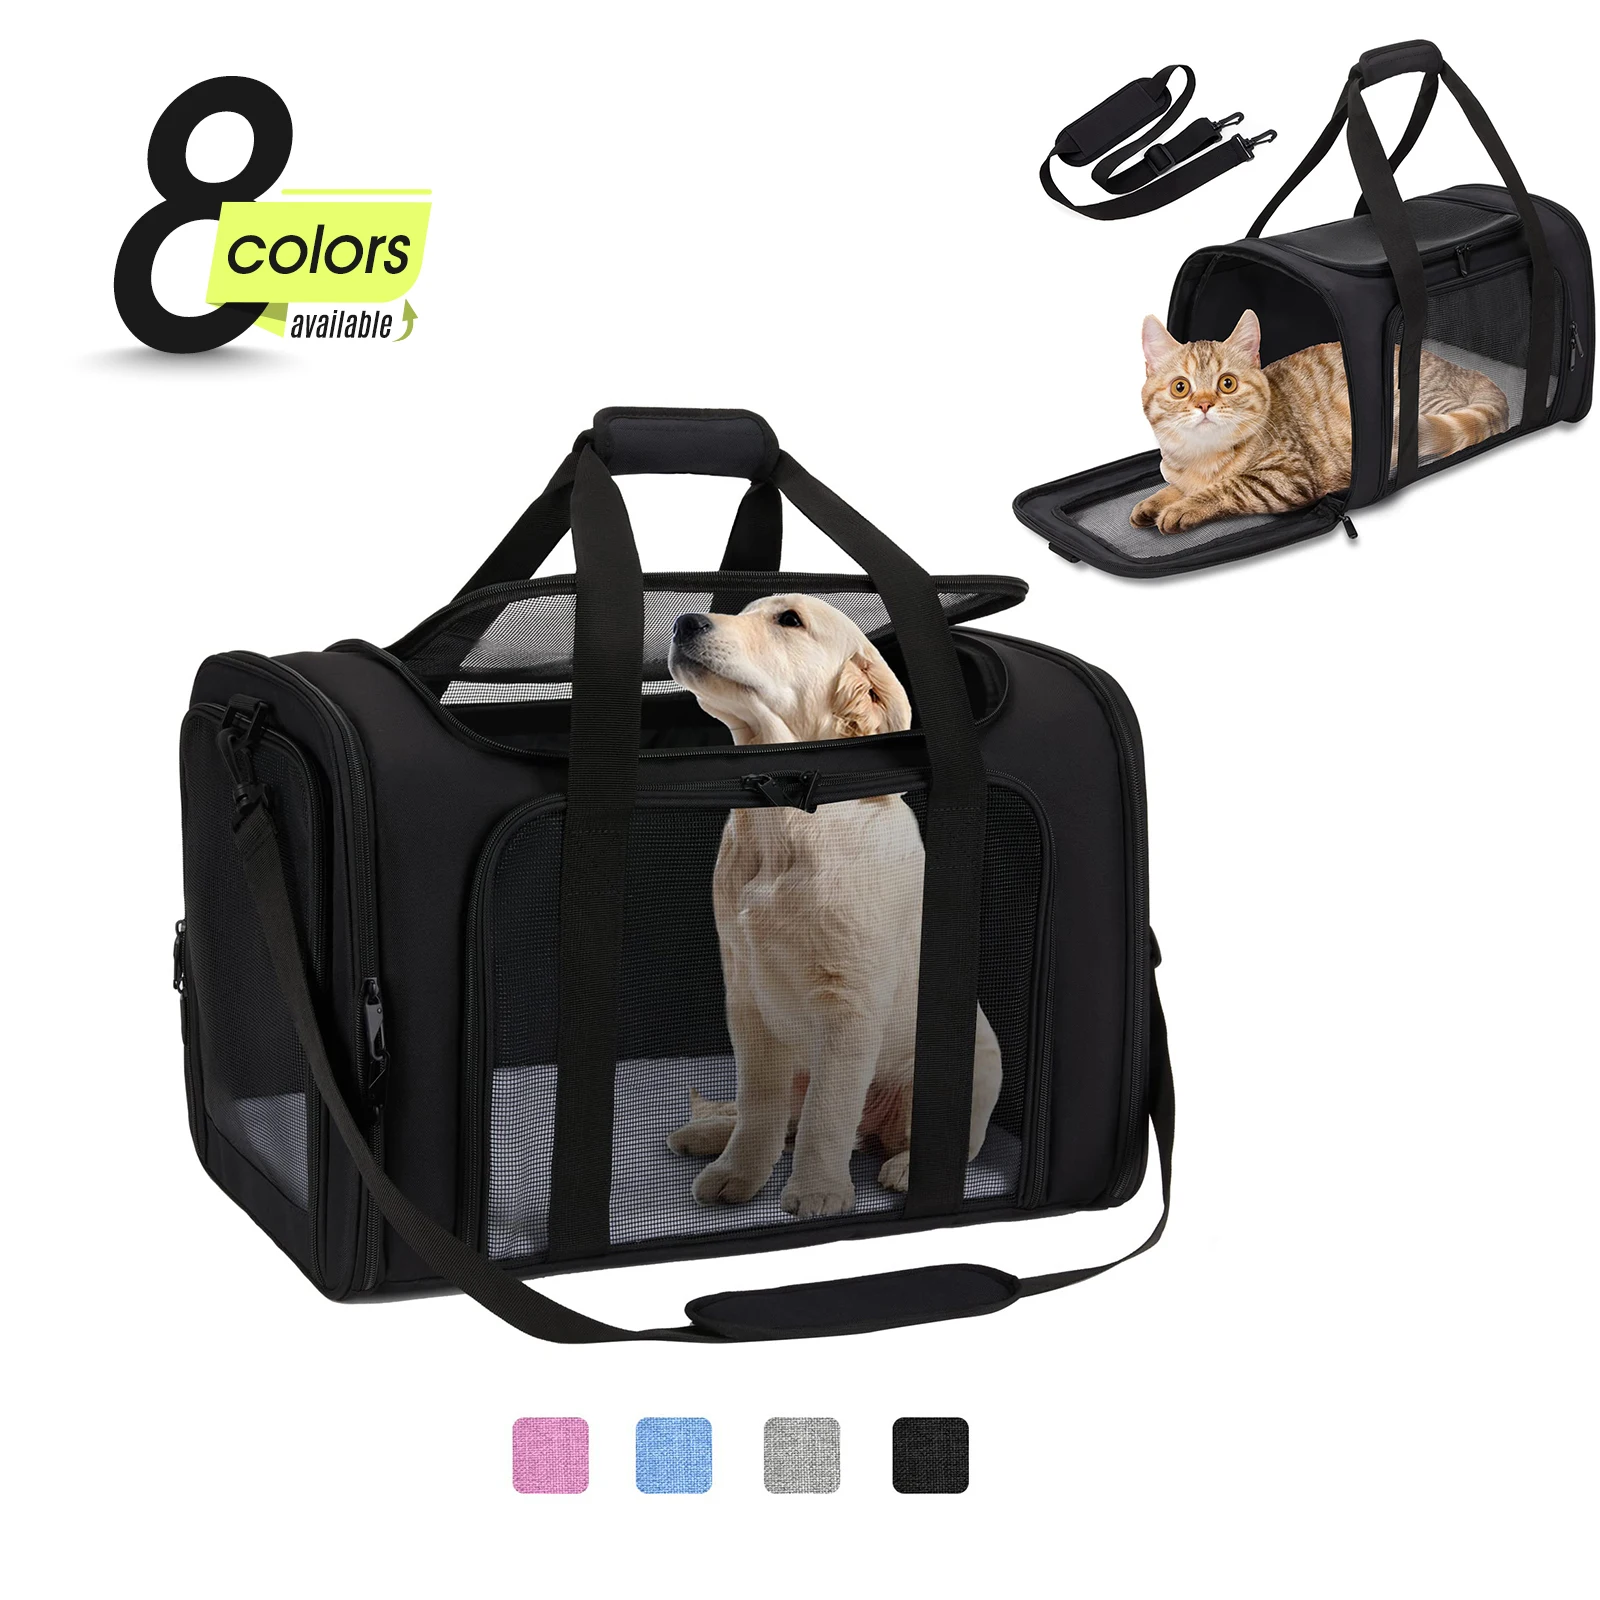 

Pet Carriers for Small Medium Cats Dogs Puppies up to 15 Lbs TSA Airline Approved Small Dog Carrier Soft Sided, Collapsible